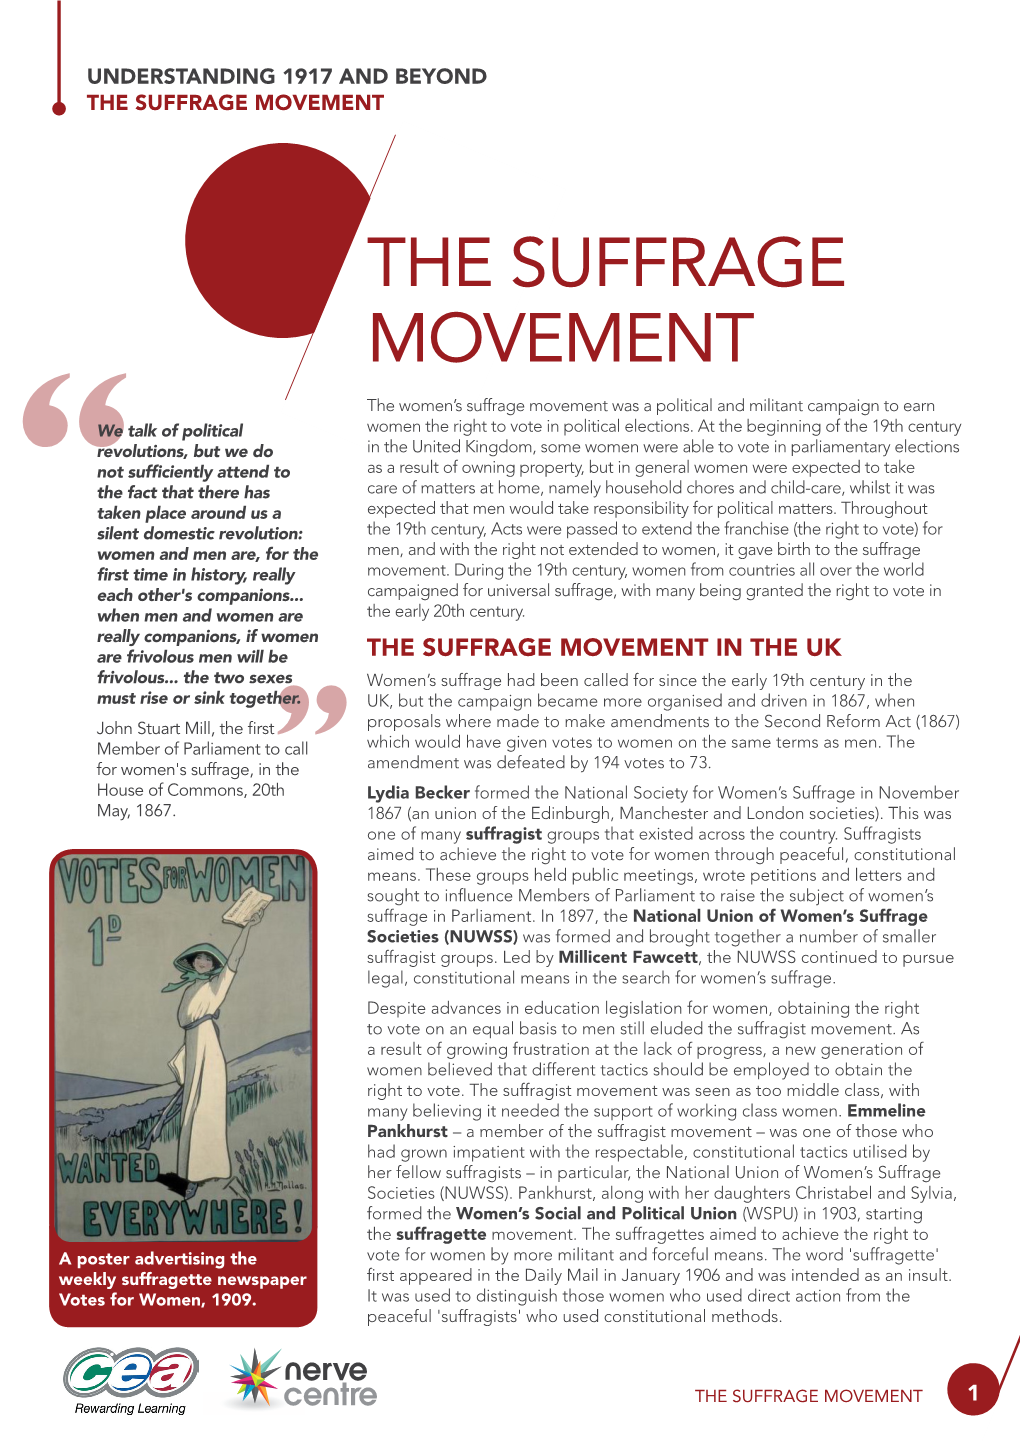 The Suffrage Movement